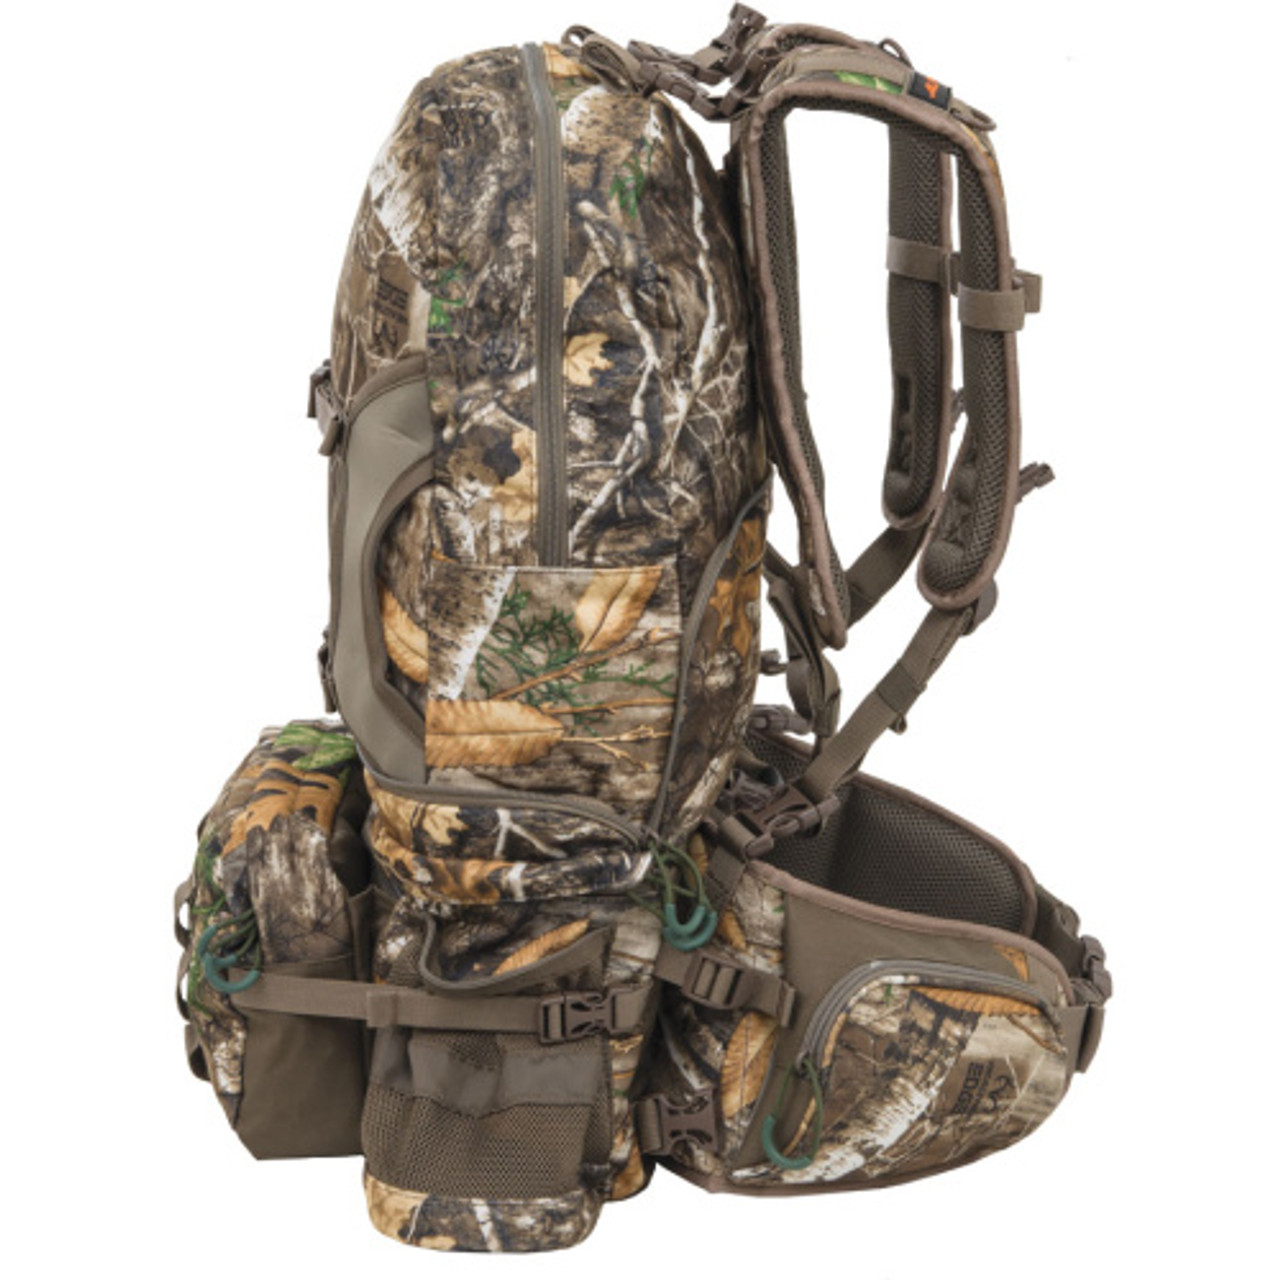 Alps OutdoorZ Realtree Edge Pathfinder Pack